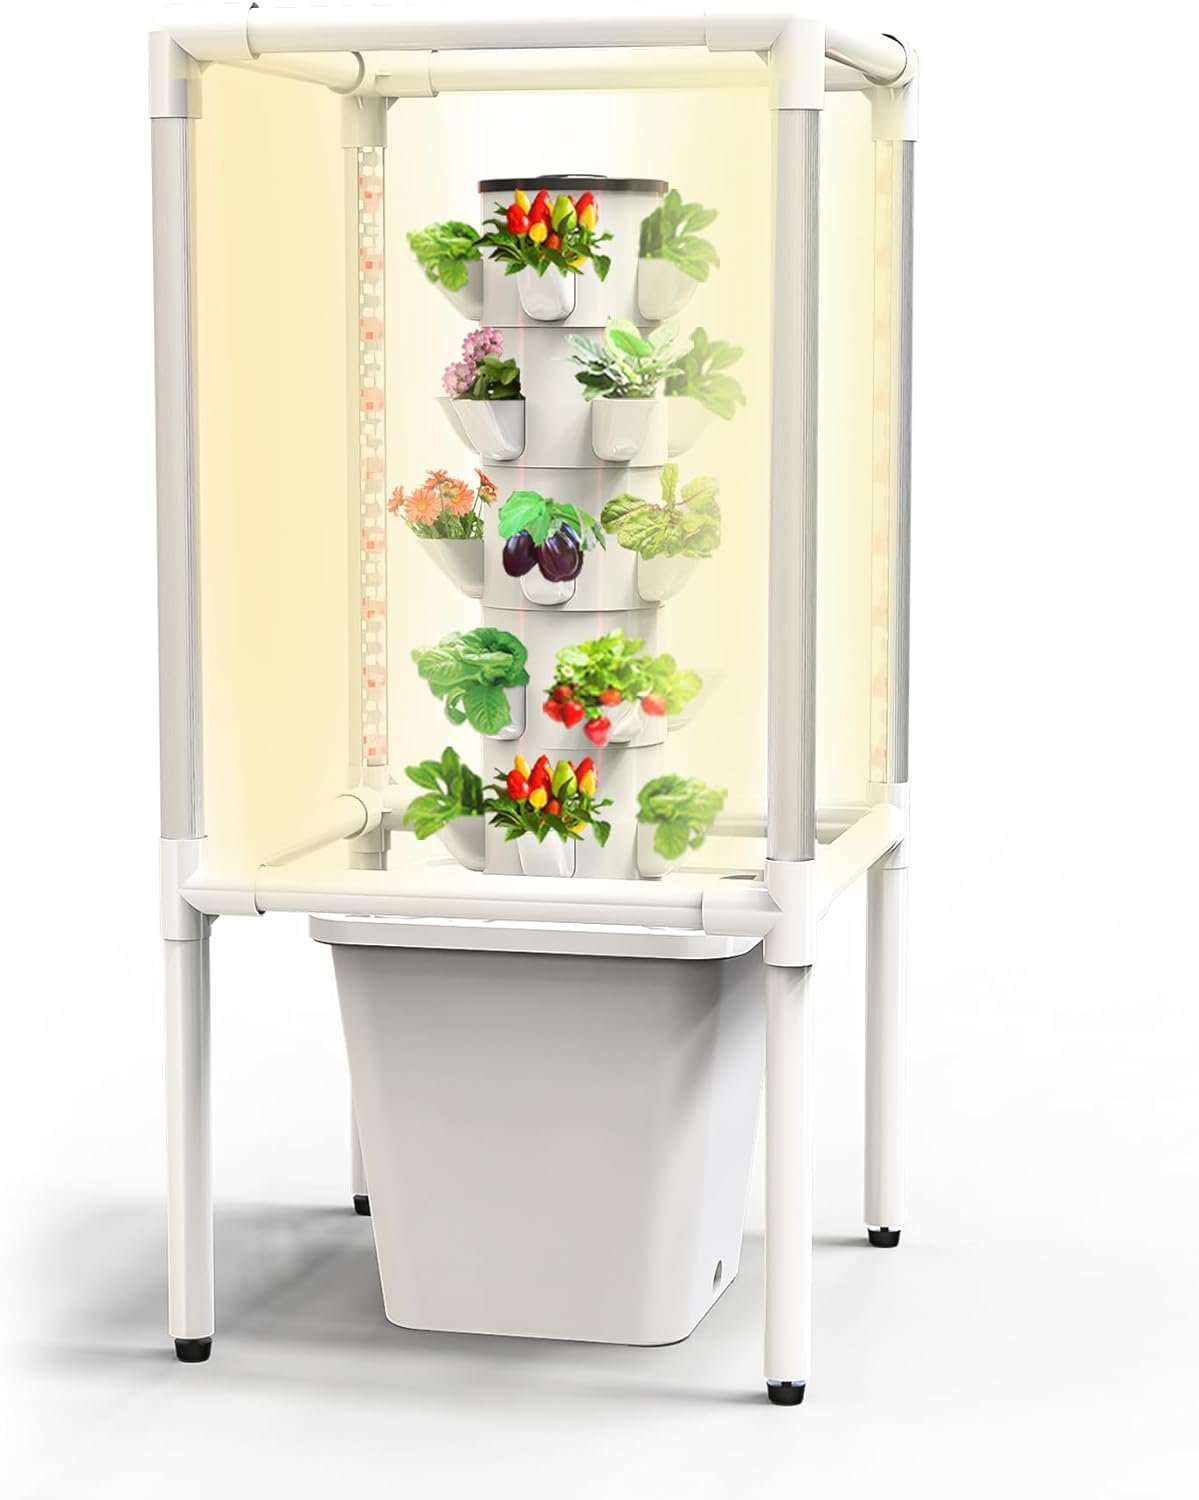 sjzx hydroponic growing system review